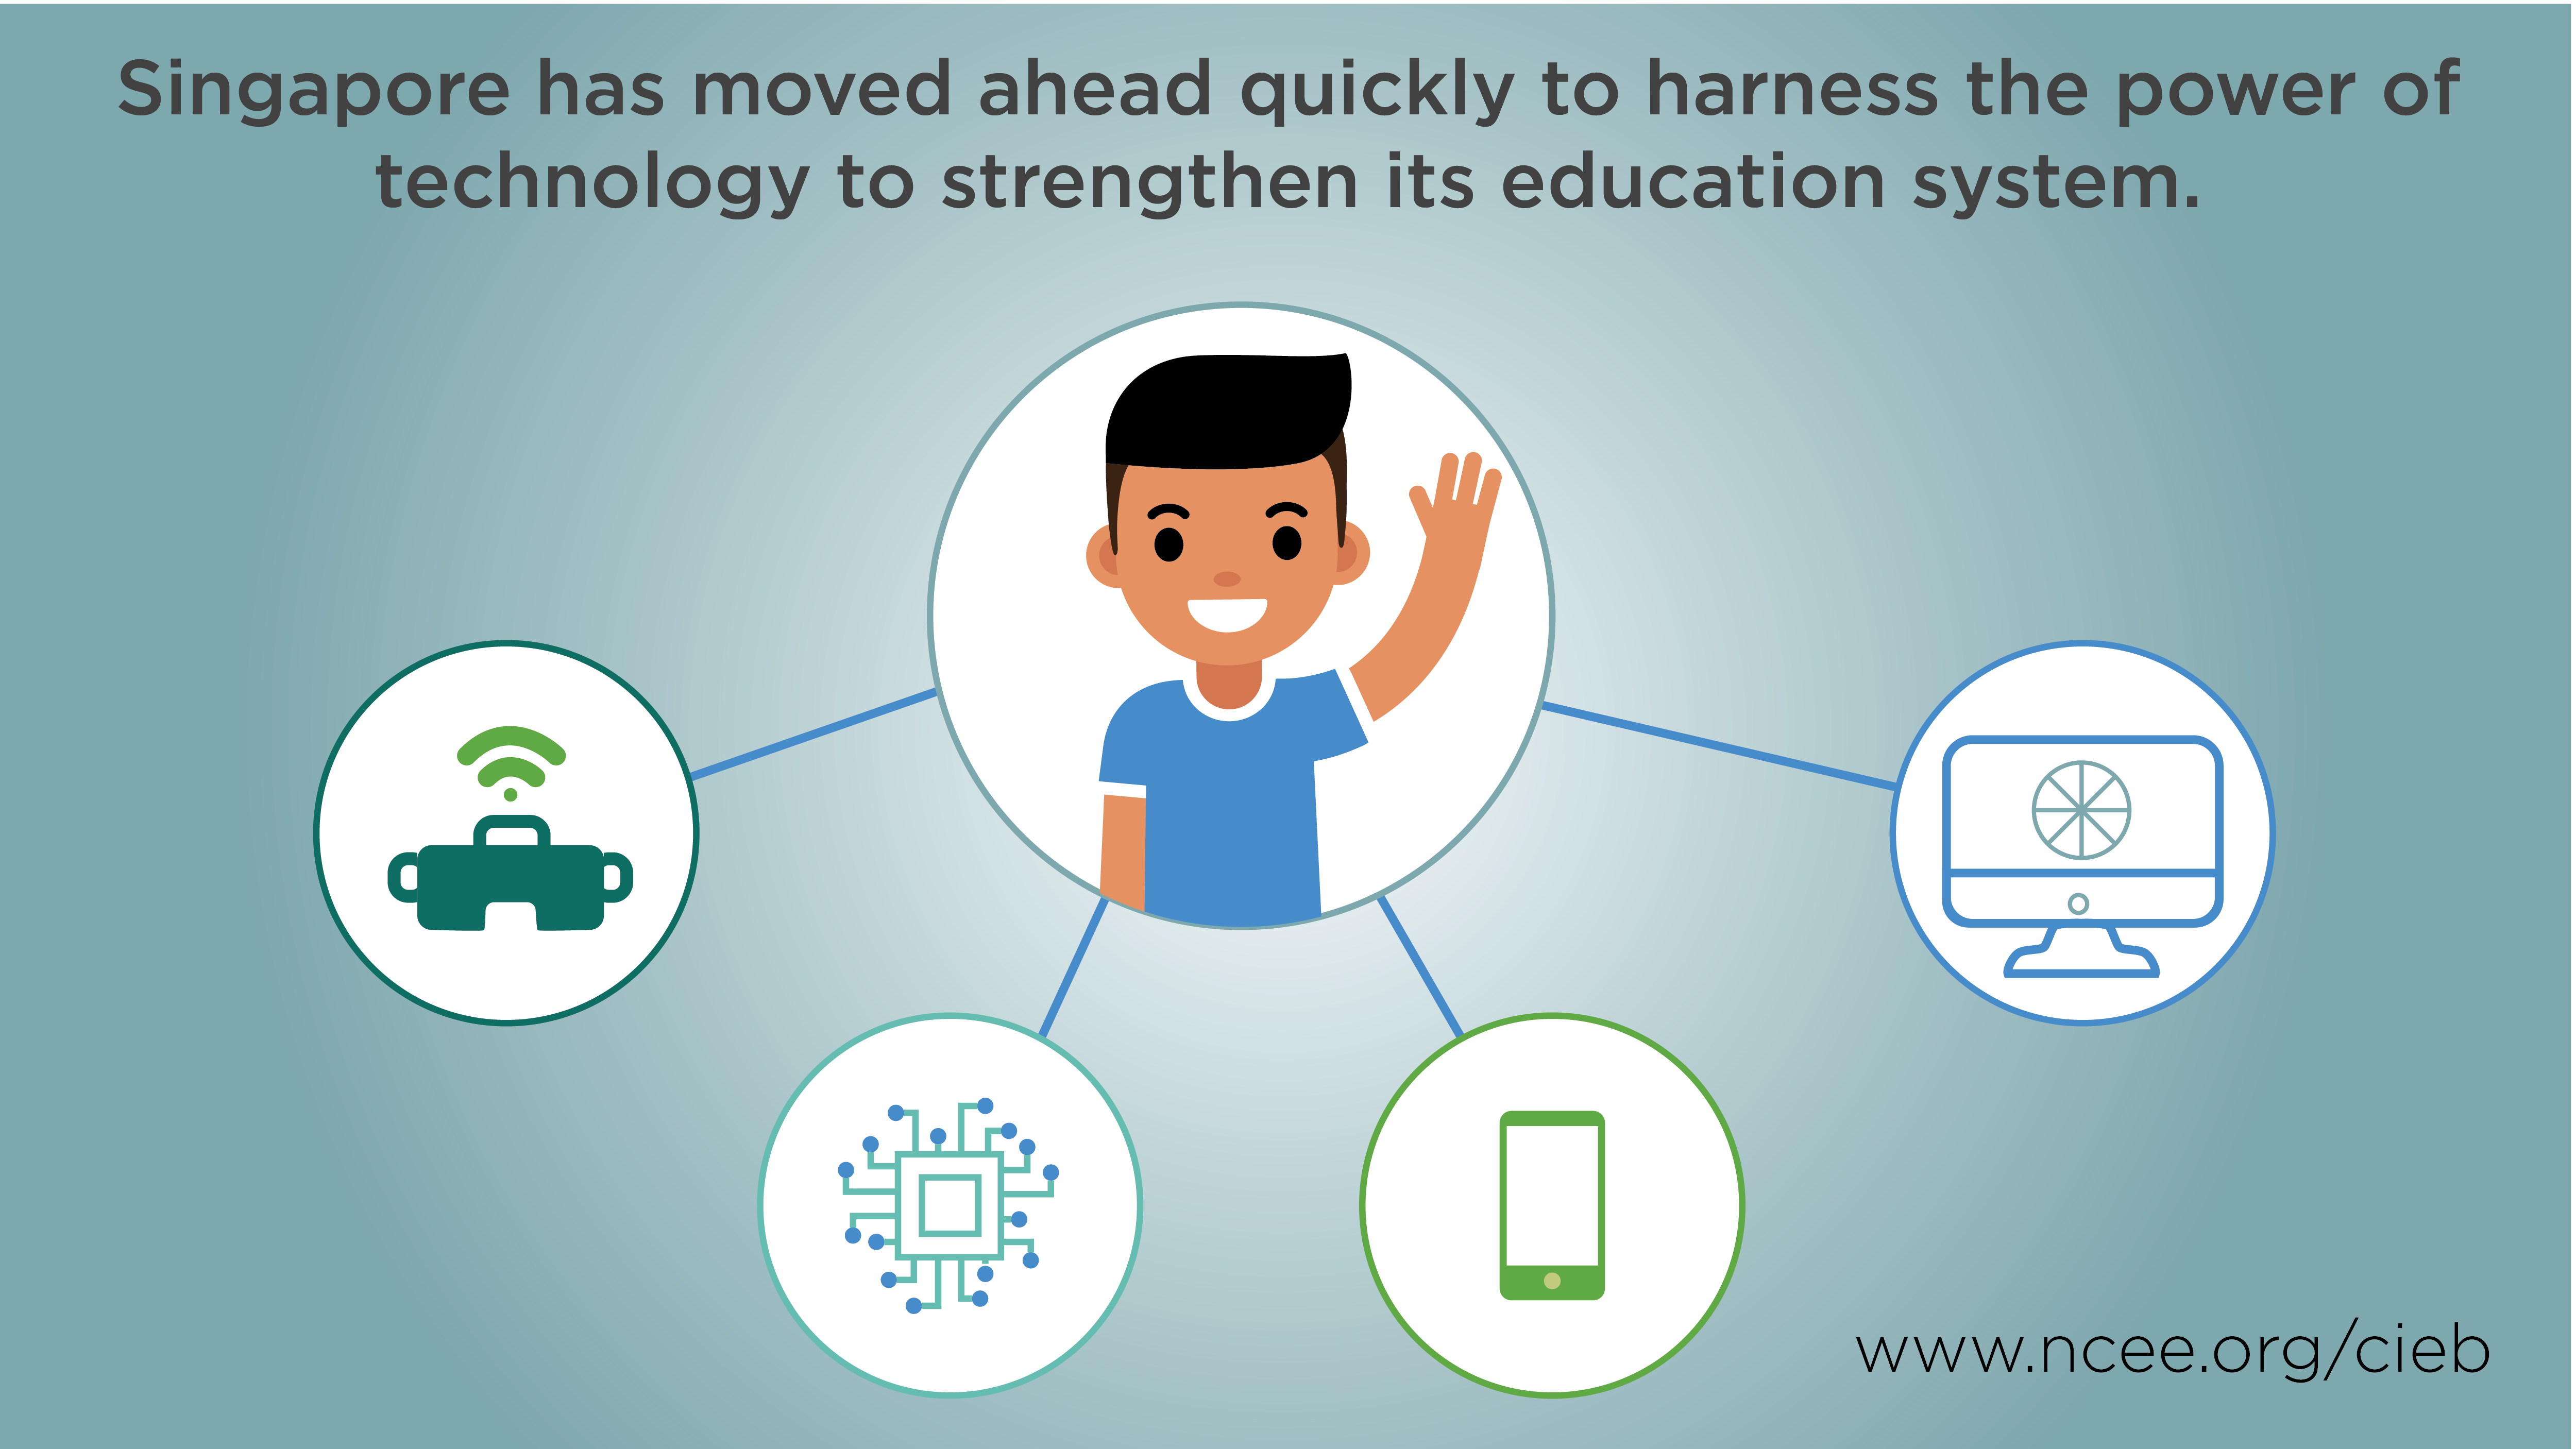 Singapore has moved ahead quickly to harness the power of technology to strengthen its education system.